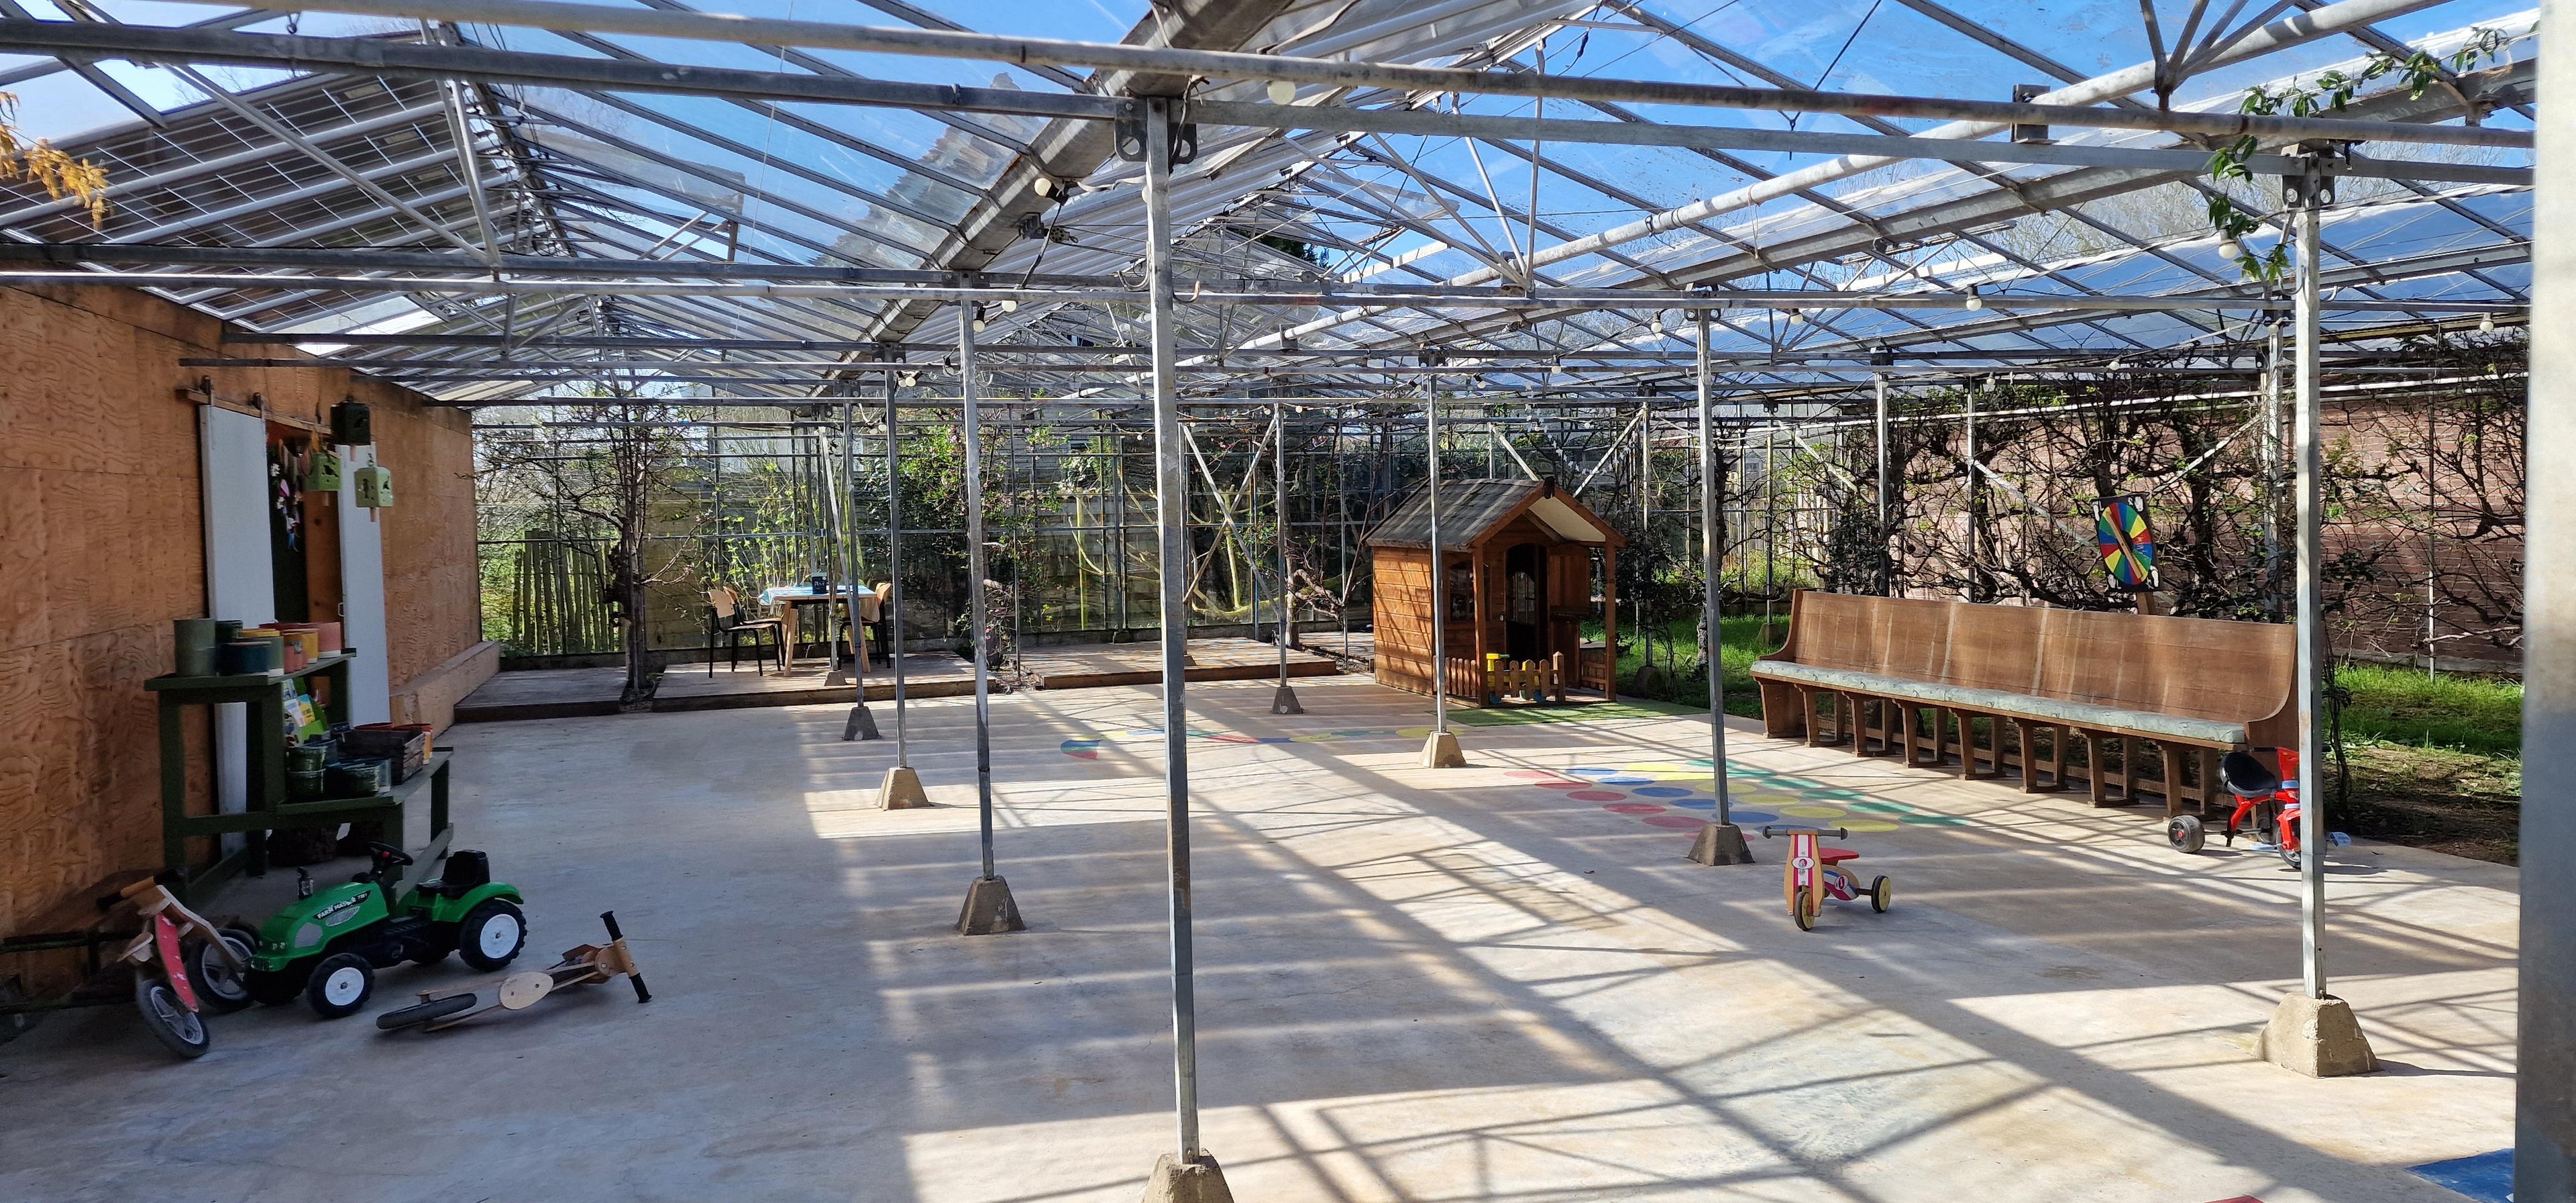 Photo of the greenhouse section